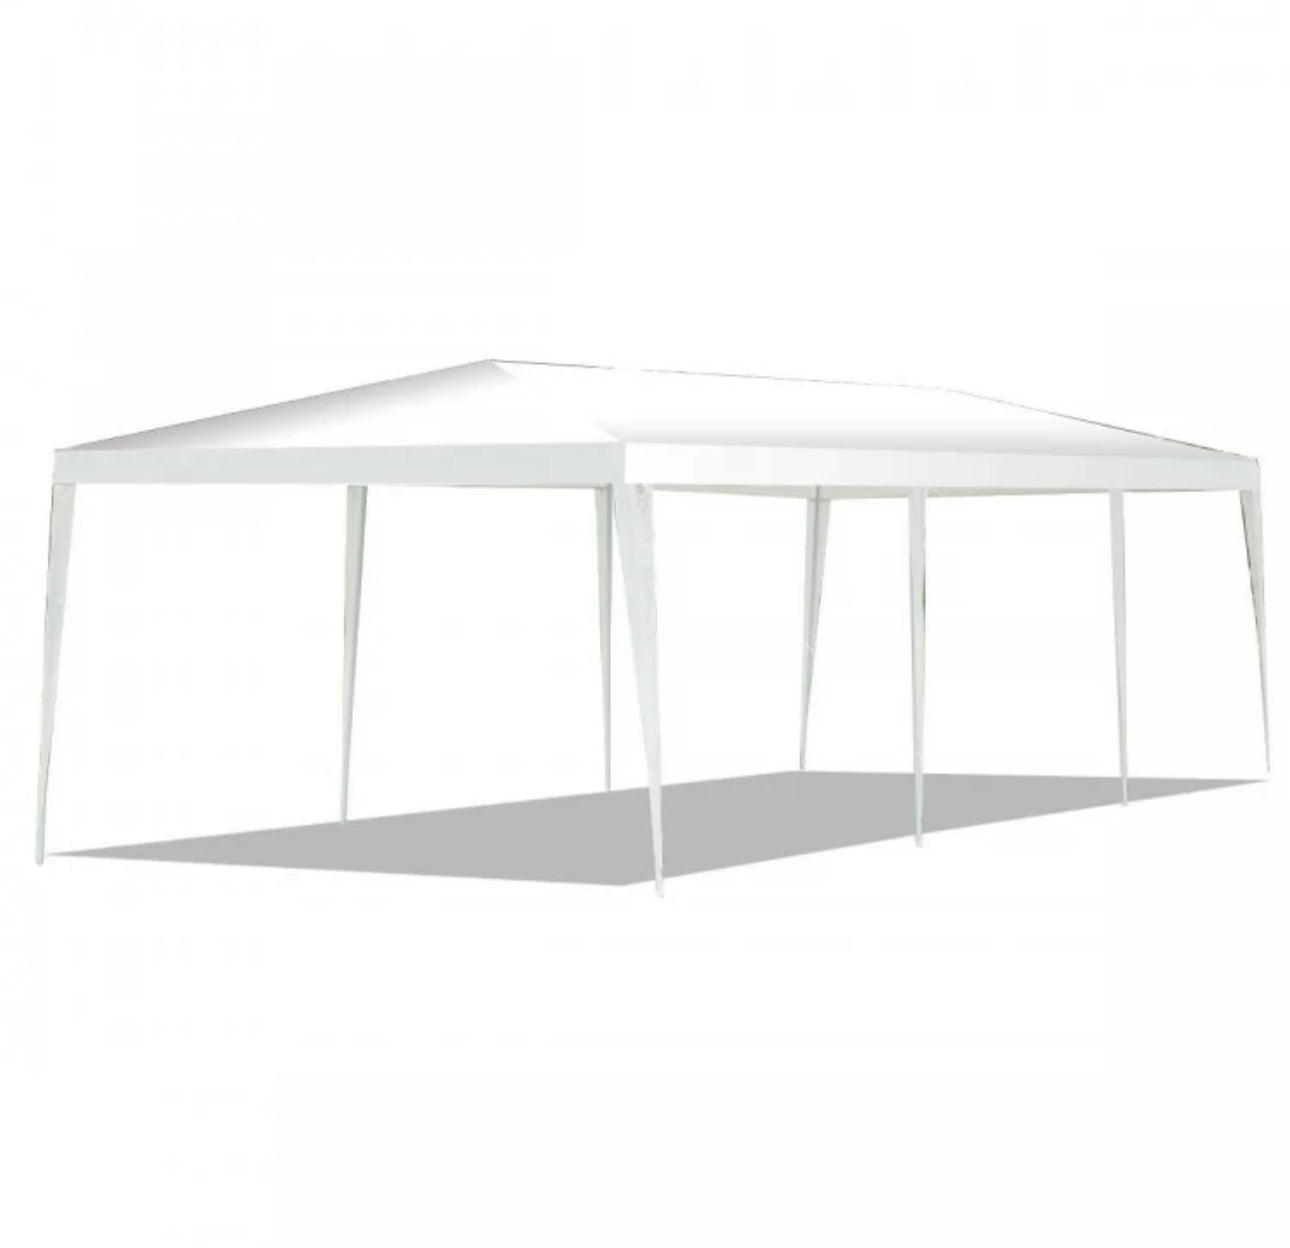 Super Cool Heavy Duty 10x30ft Gazebo Canopy Tent With Ground Stakes, Wind Ropes | Waterproof | Easy Assembly | Patio Tent